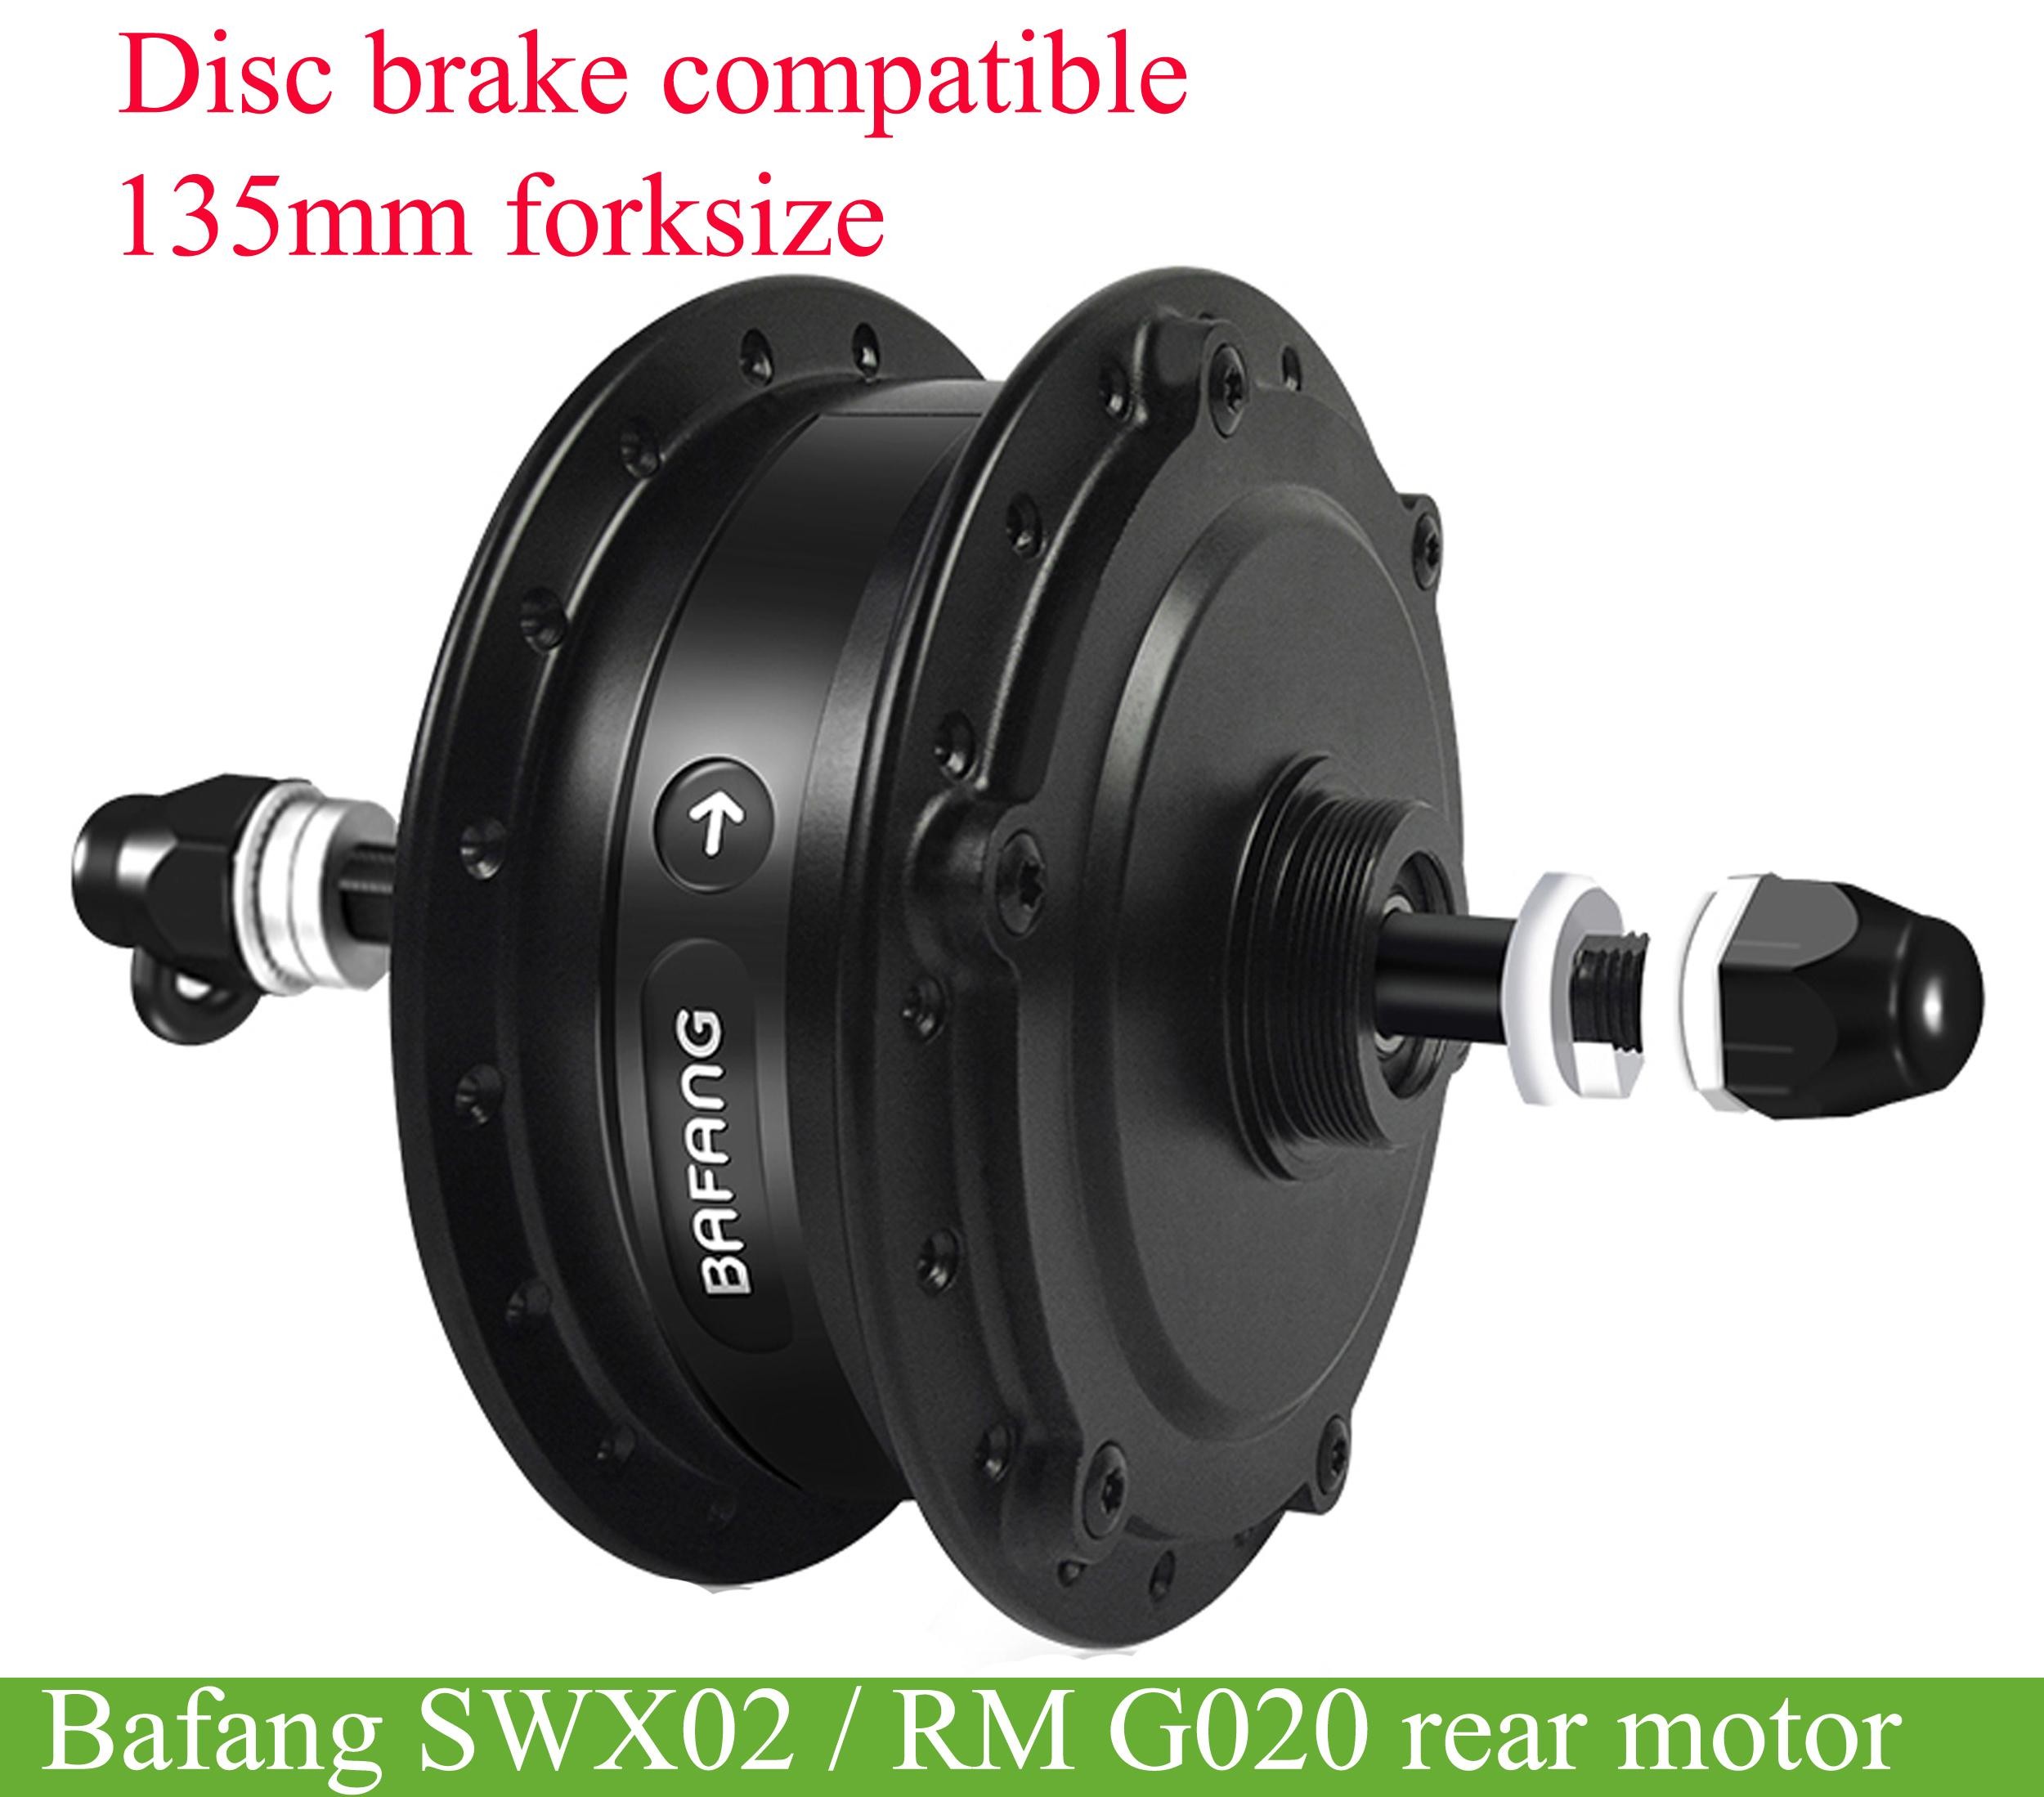 Bafang 500W/750W 36V/48V Rear hub motor SWX02/ RM G020  engine- BBS, ebike batteries, Bafang M620, Bafang M600,  Bafang M500, Bafang M510, KT controller with display